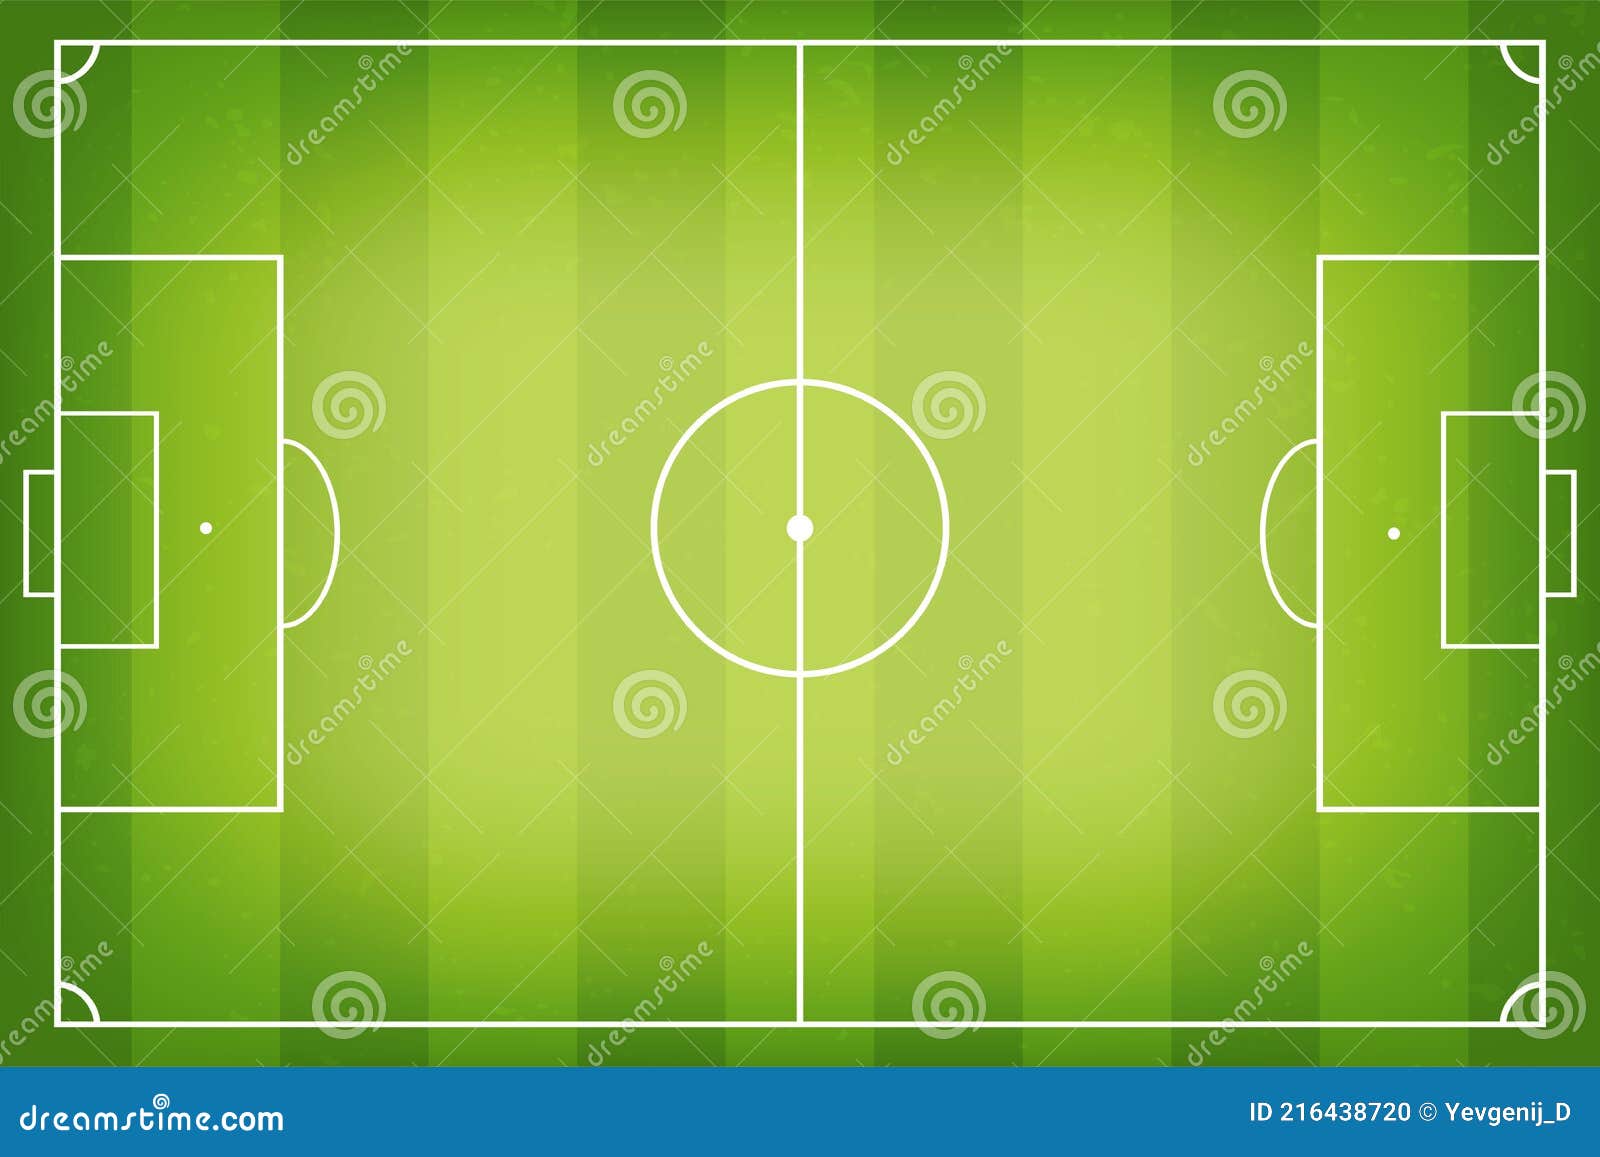 Soccer Field, Football Pitch. Soccer Fields in Top View Stock Vector -  Illustration of league, corner: 216438720